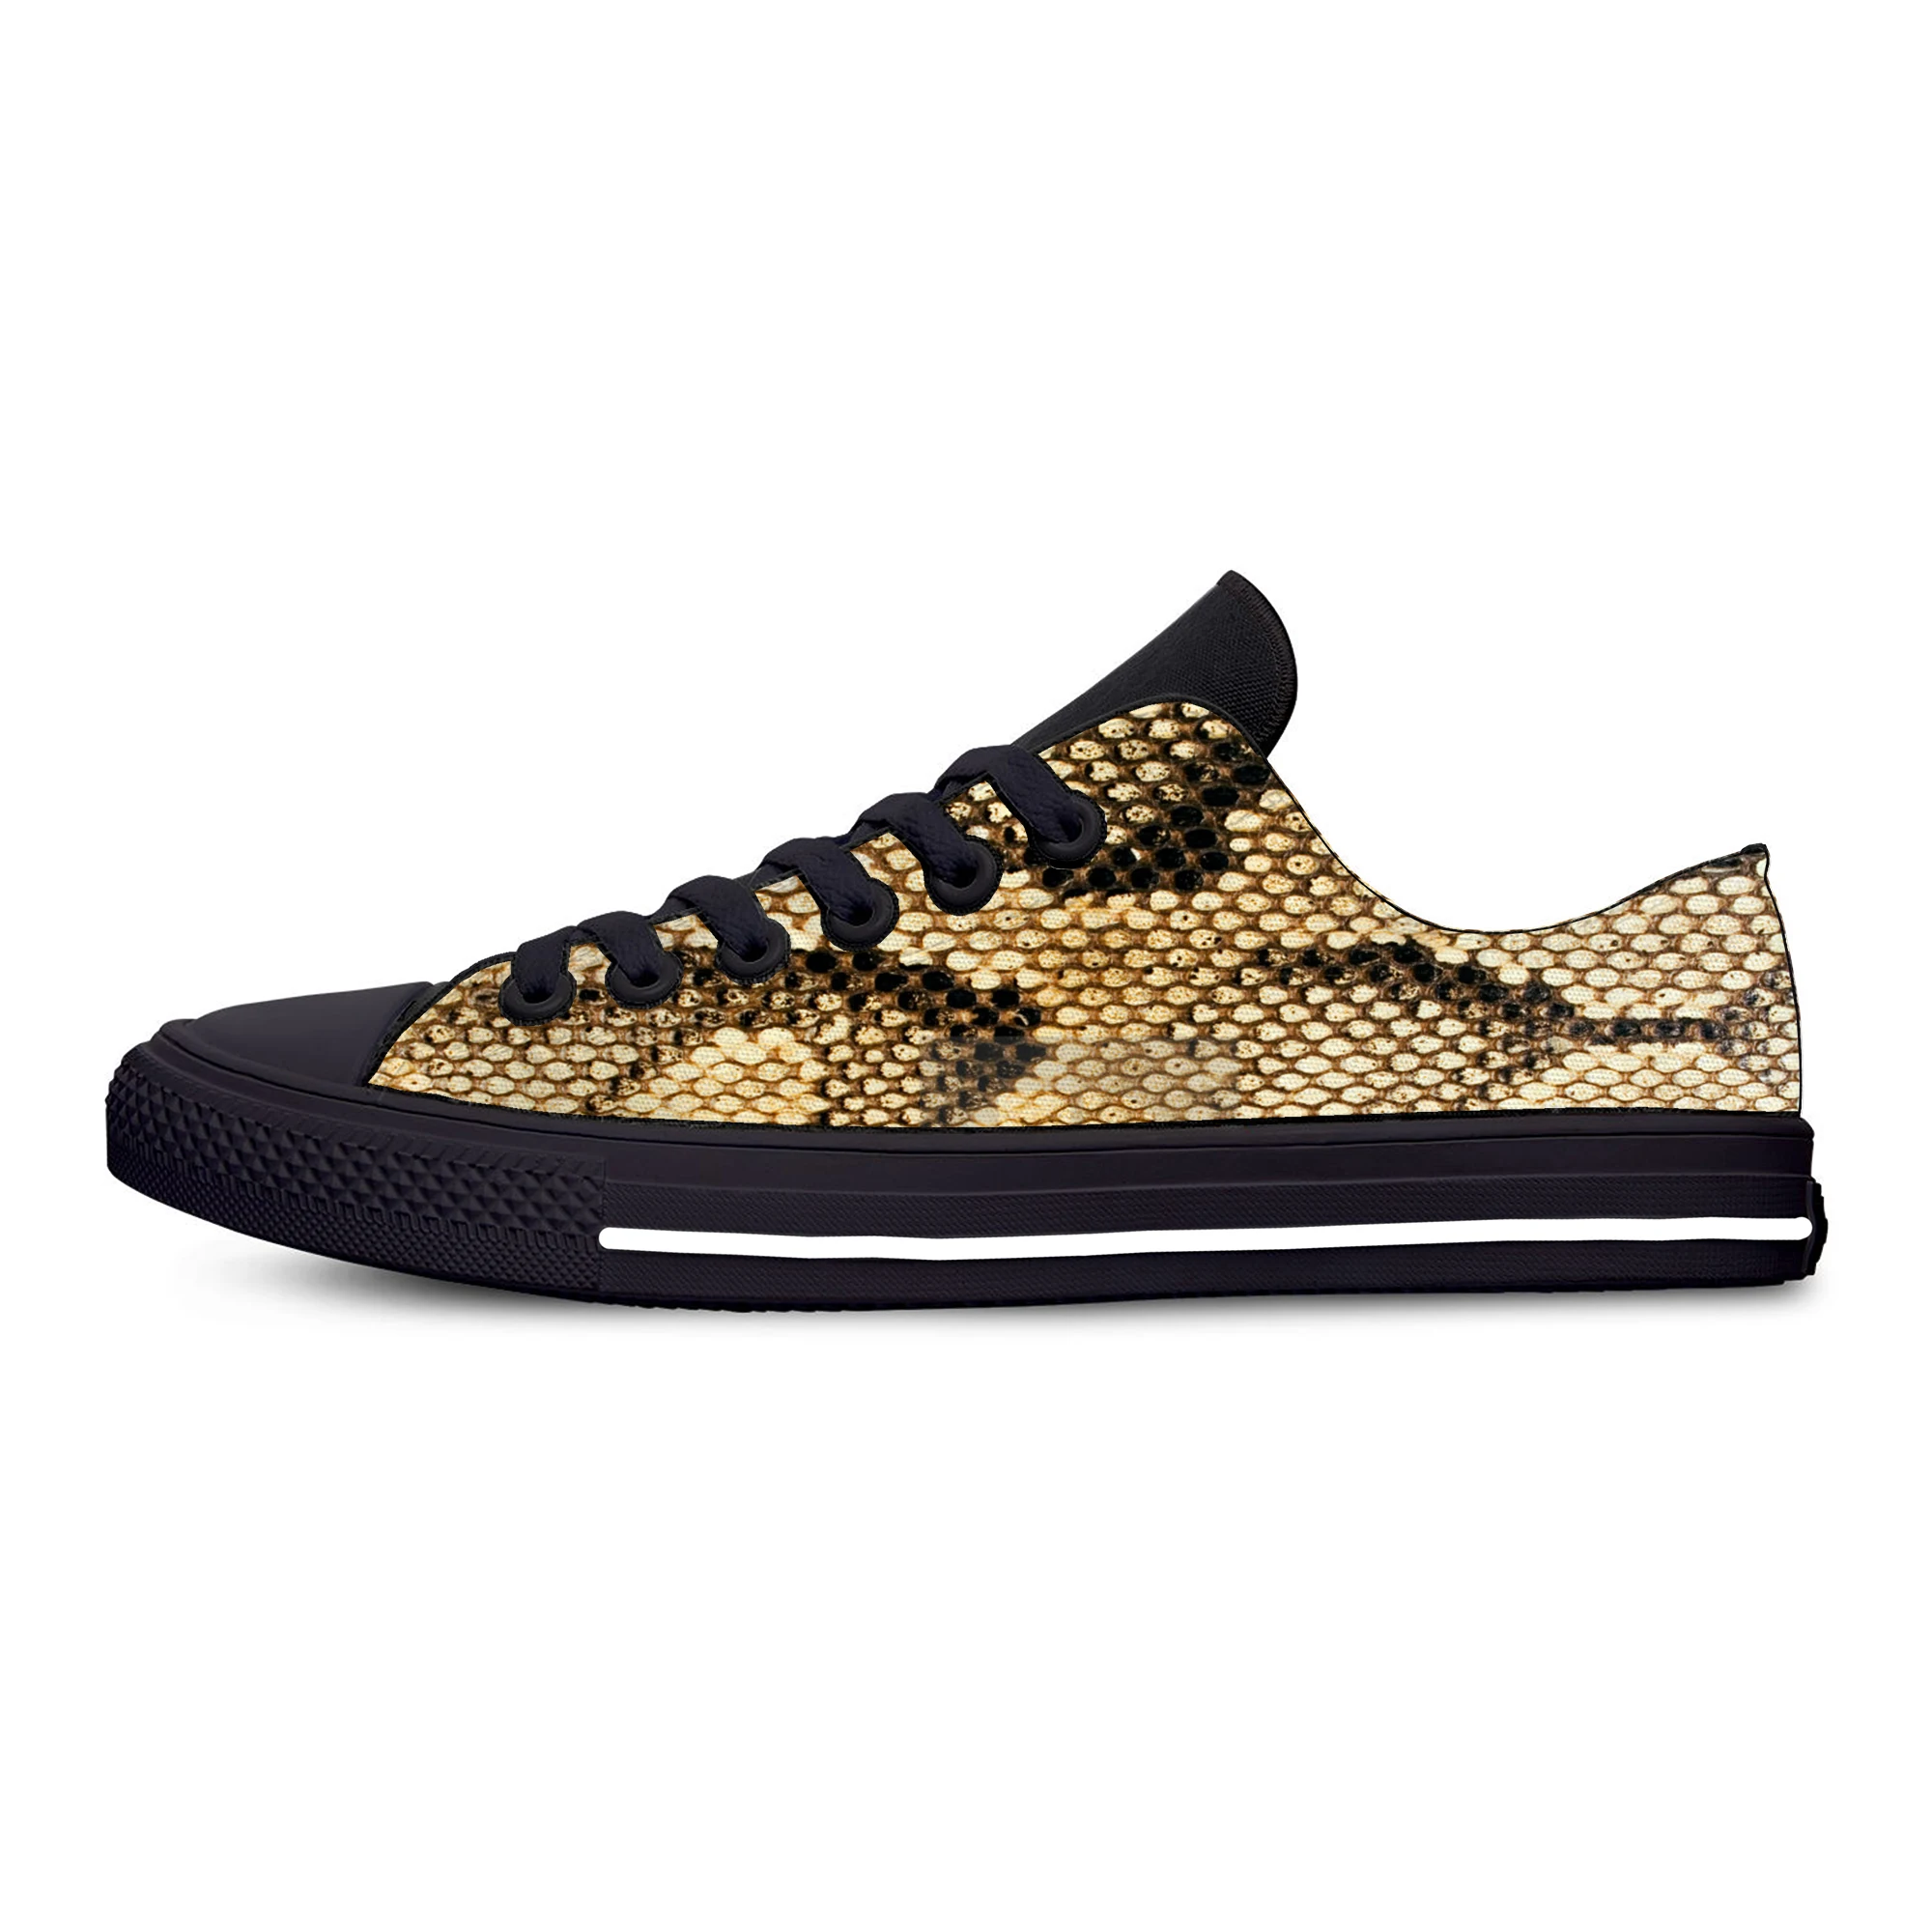 

Hot Snakeskin Python Skin Pattern Fashion Board Shoes Funny Low Top Lightweight Cool Casual Shoes Breathable Men Women Sneakers